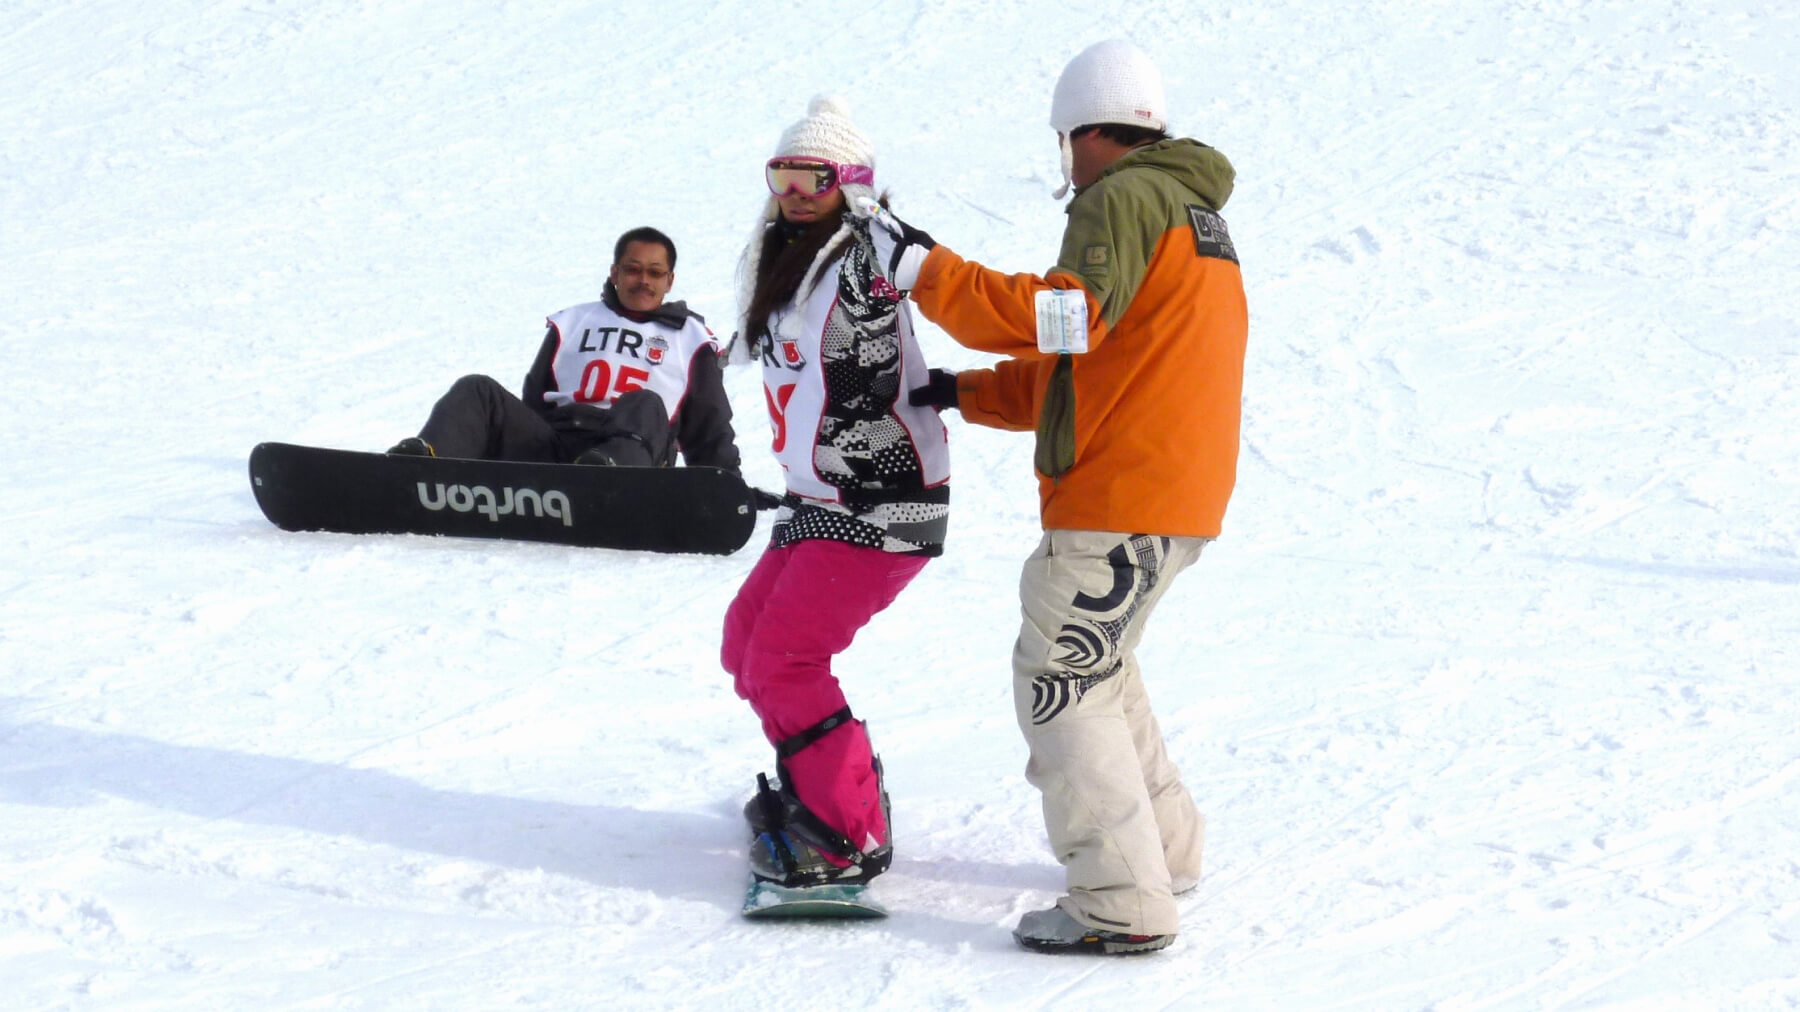 Foreign guest snowboarding school image